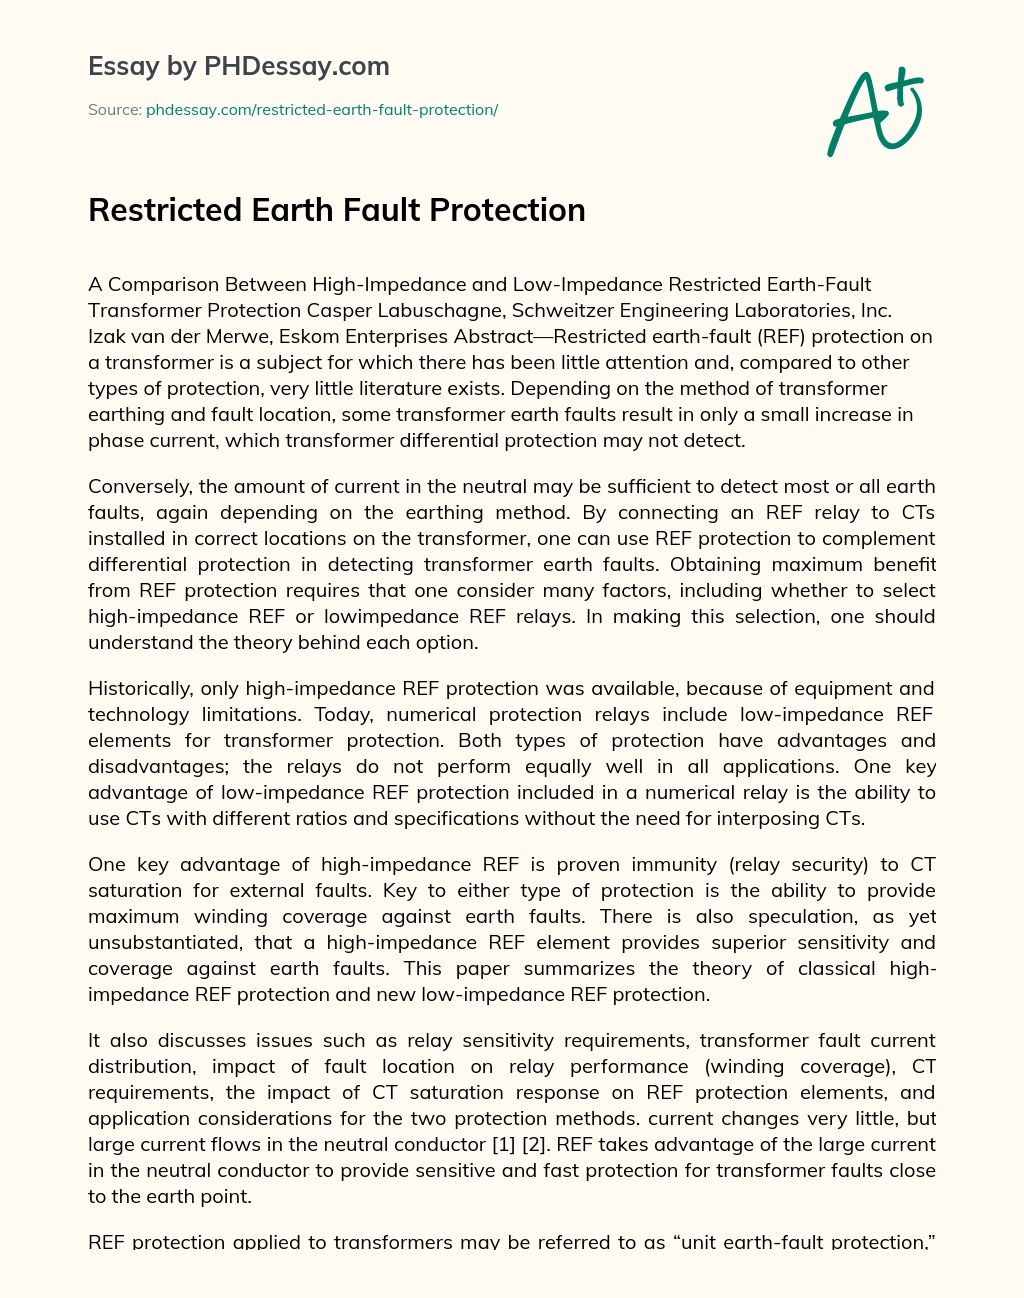 Restricted Earth Fault Protection essay